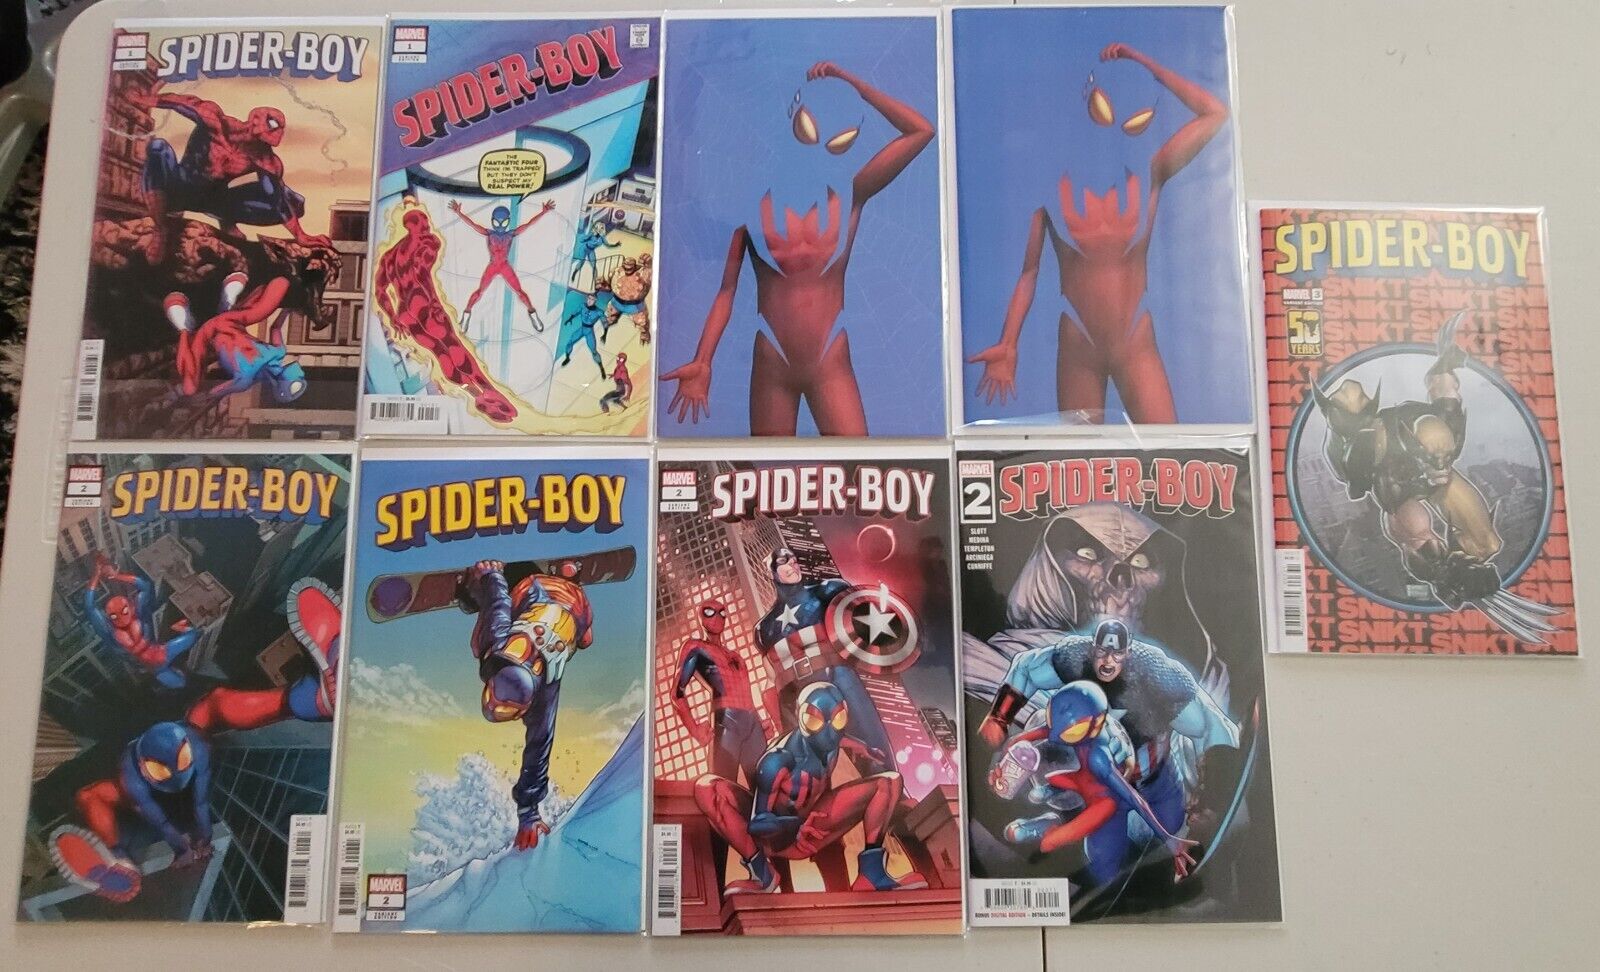 Spider-Boy Lot Of 9 #1x4, #2x4 & #3 (See Pics For Cover Titles)